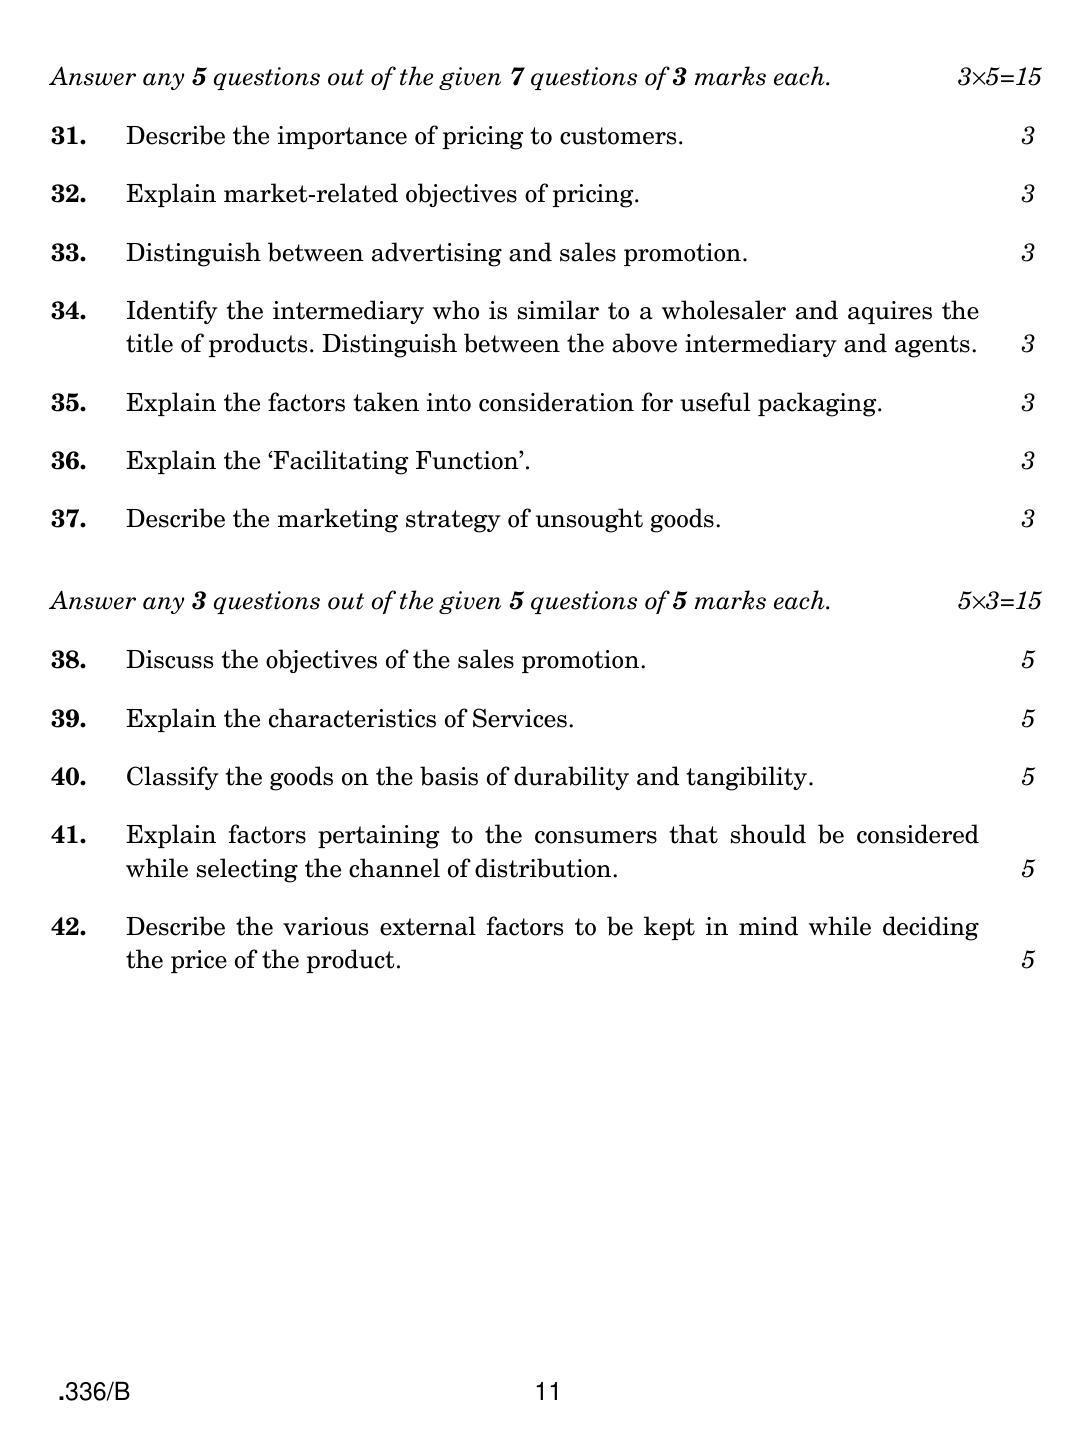 CBSE Class 12 Marketing 2020 Compartment Question Paper - Page 11